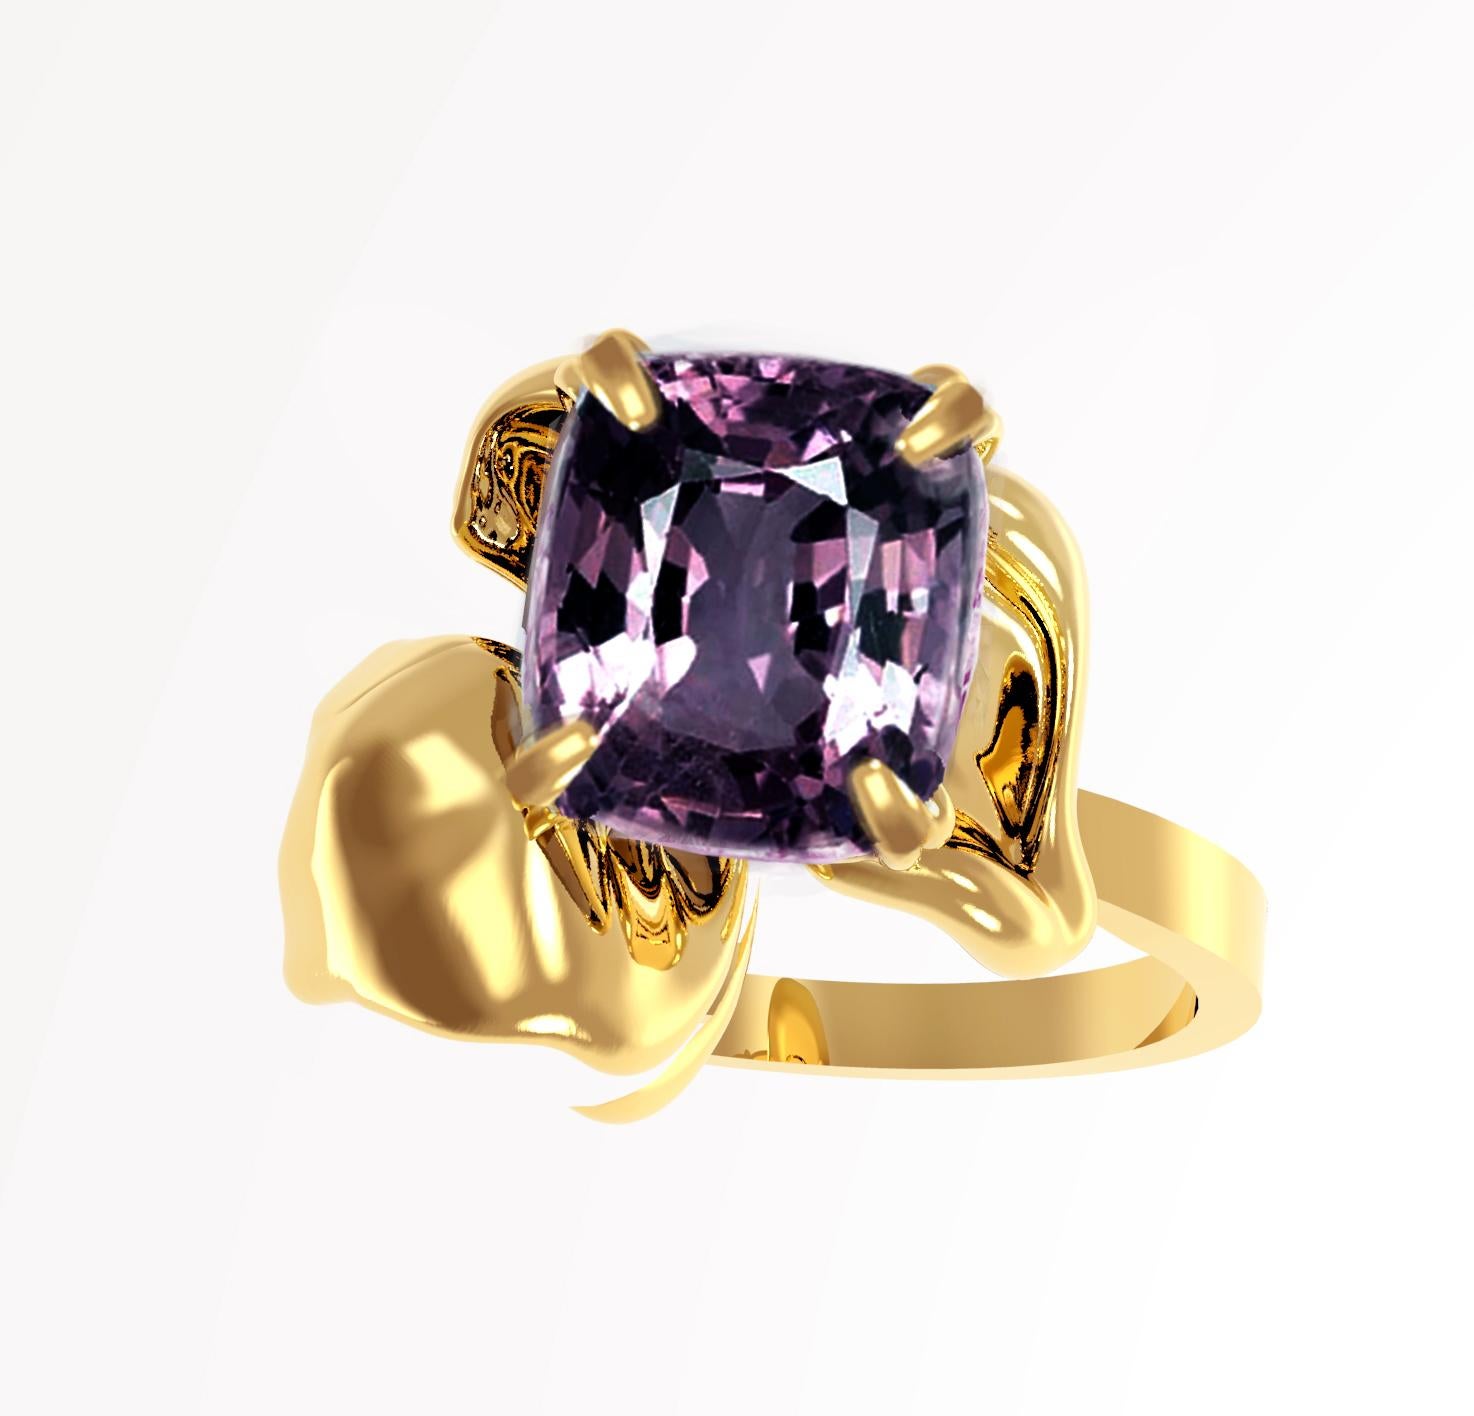 This Buttercup Flower contemporary ring is crafted in 18 karat yellow gold and adorned with a natural cushion ink purple spinel weighing 1.4 carats.  The yellow gold perfectly complements the ink purple spinel, creating a beautiful contrast. Yet